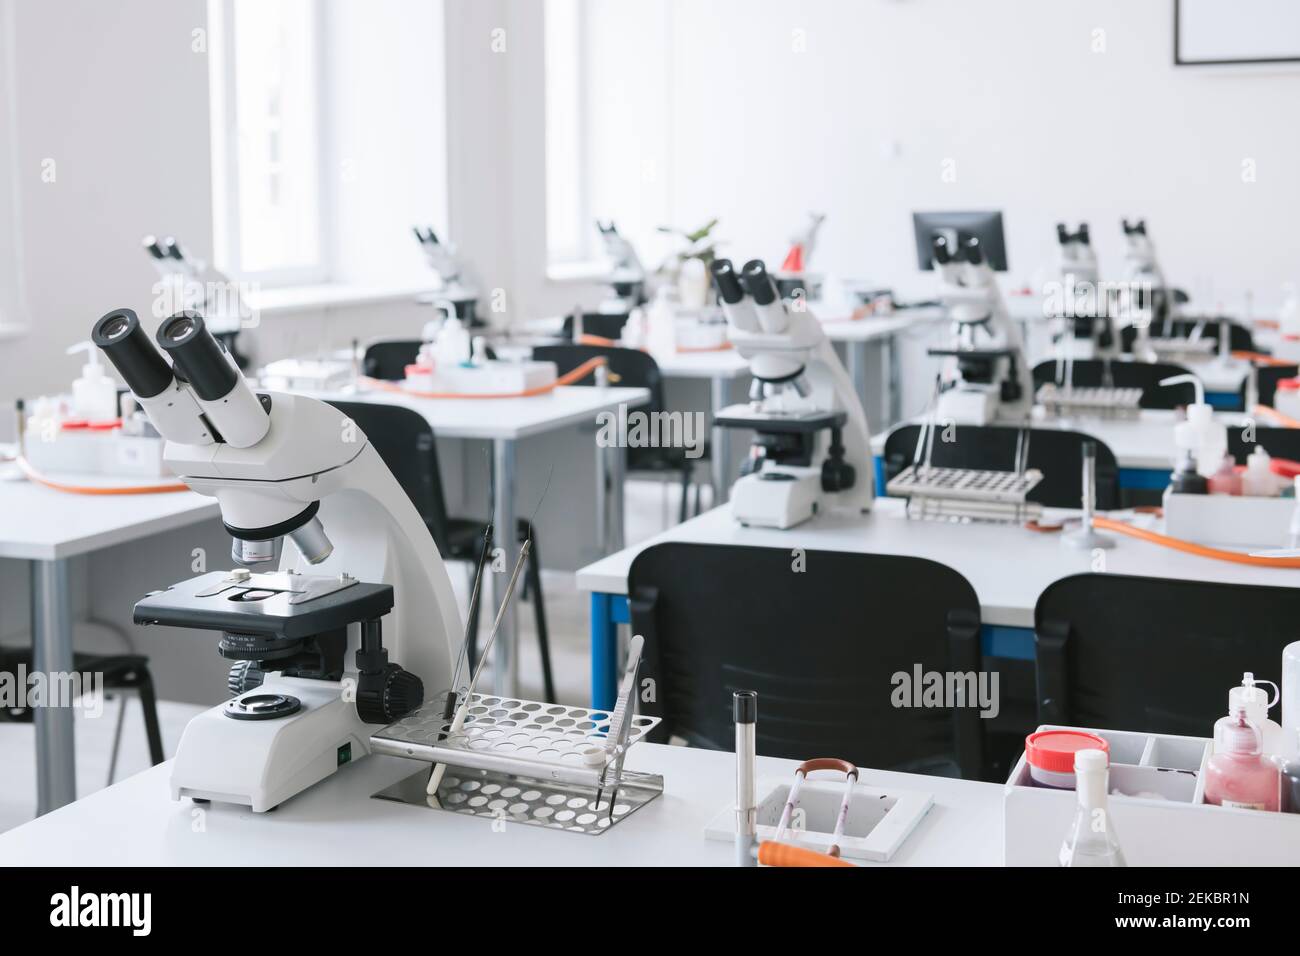 Microscopes in a science lab classroom Stock Photo